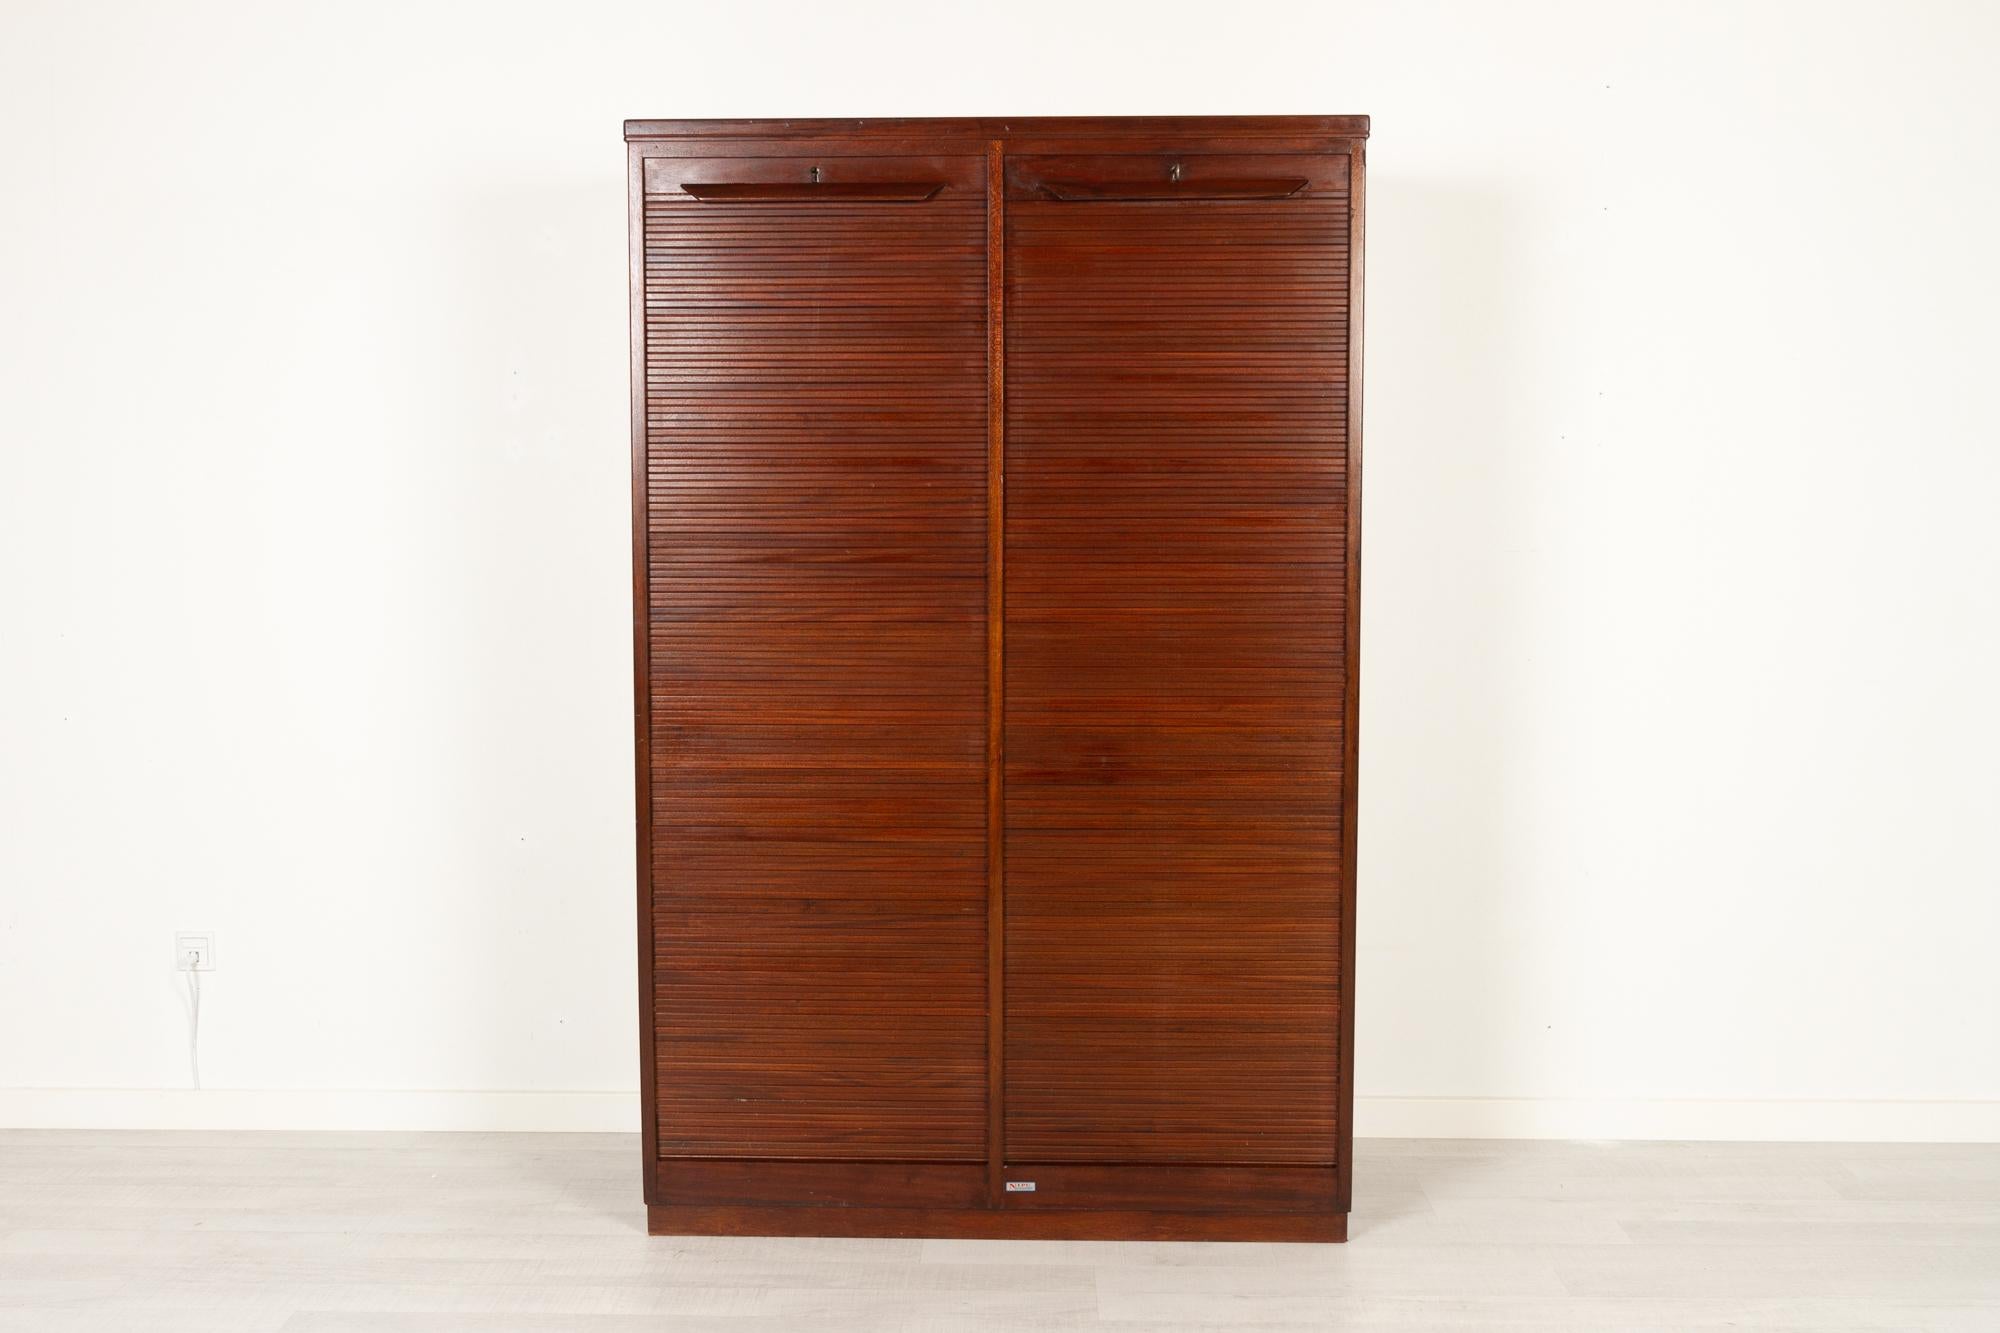 Vintage Danish cabinet with tambour doors by Nipu, Denmark 1950s
Large double filing cabinet with vertical tambour doors in stained hardwood. Two compartments with a total of twelve shelves of which ten are adjustable/removable. One key is